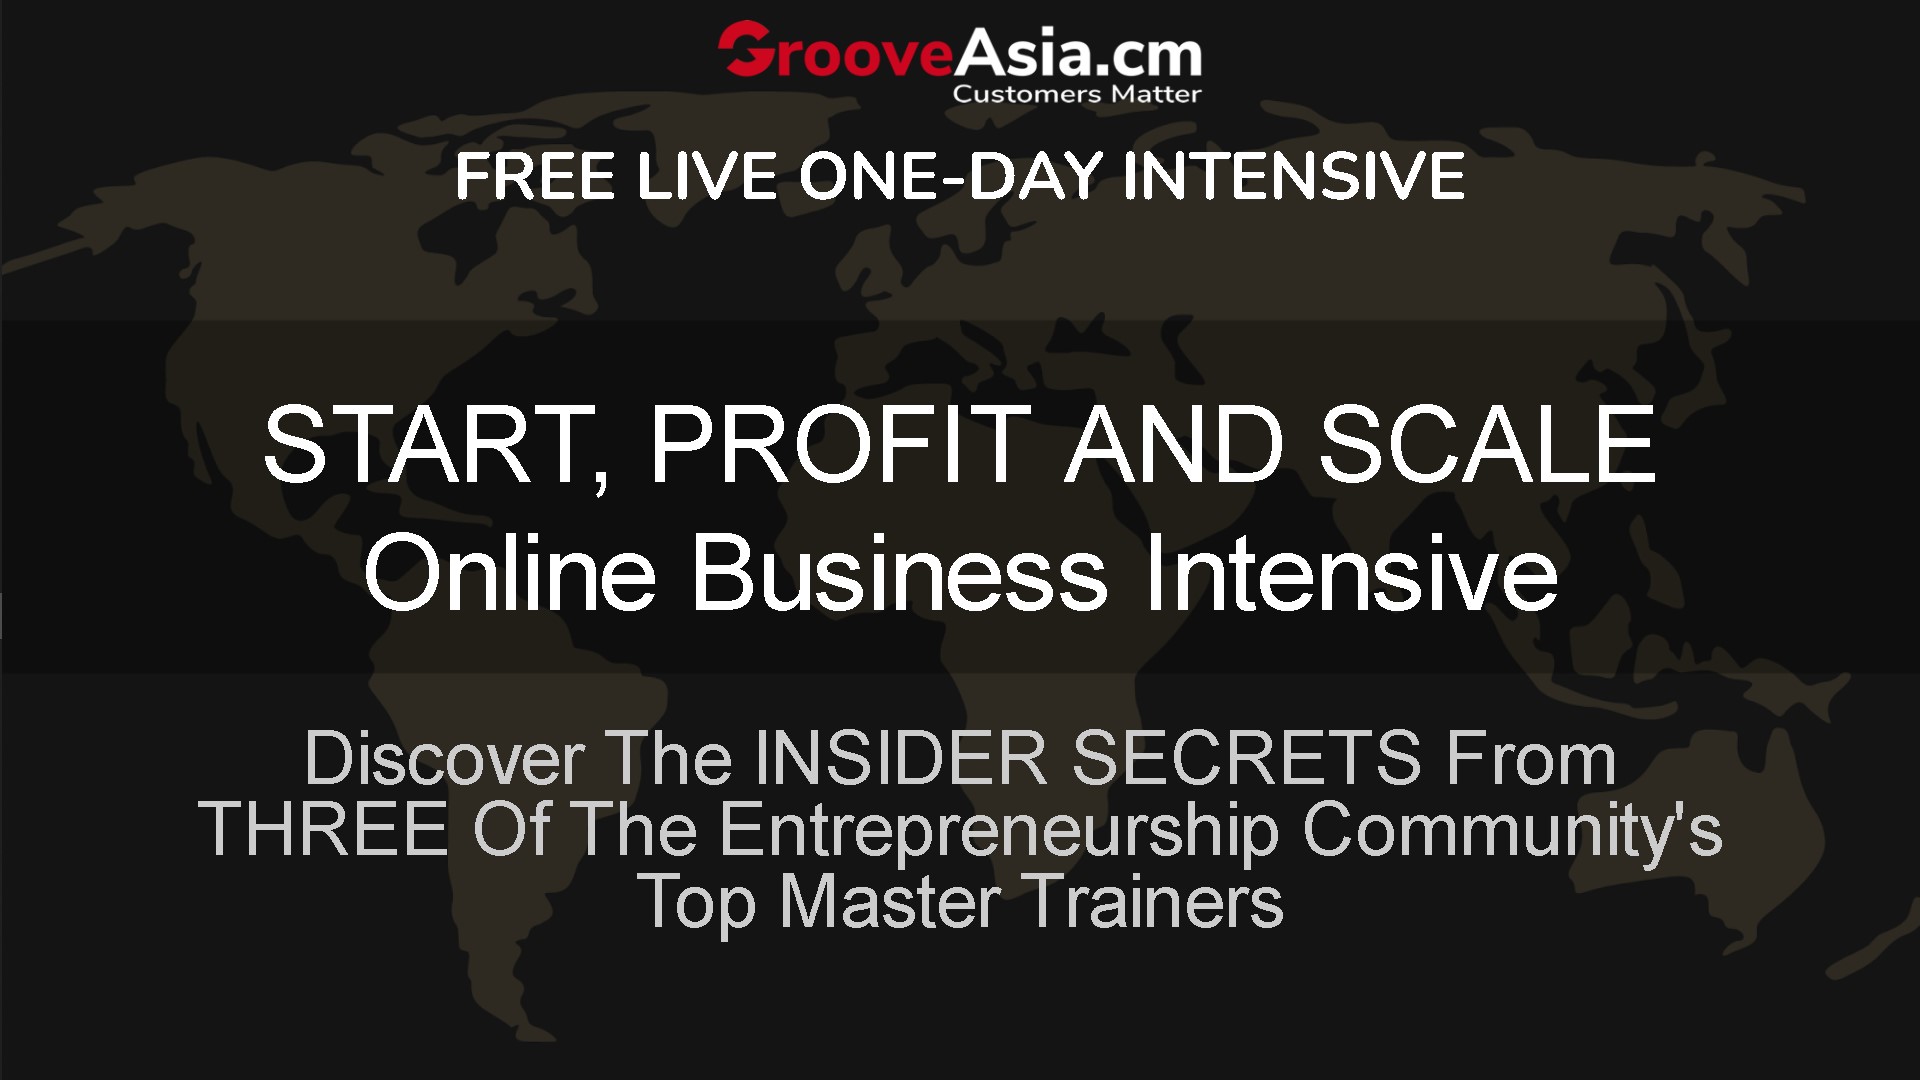 grooveasia free one day business intensive